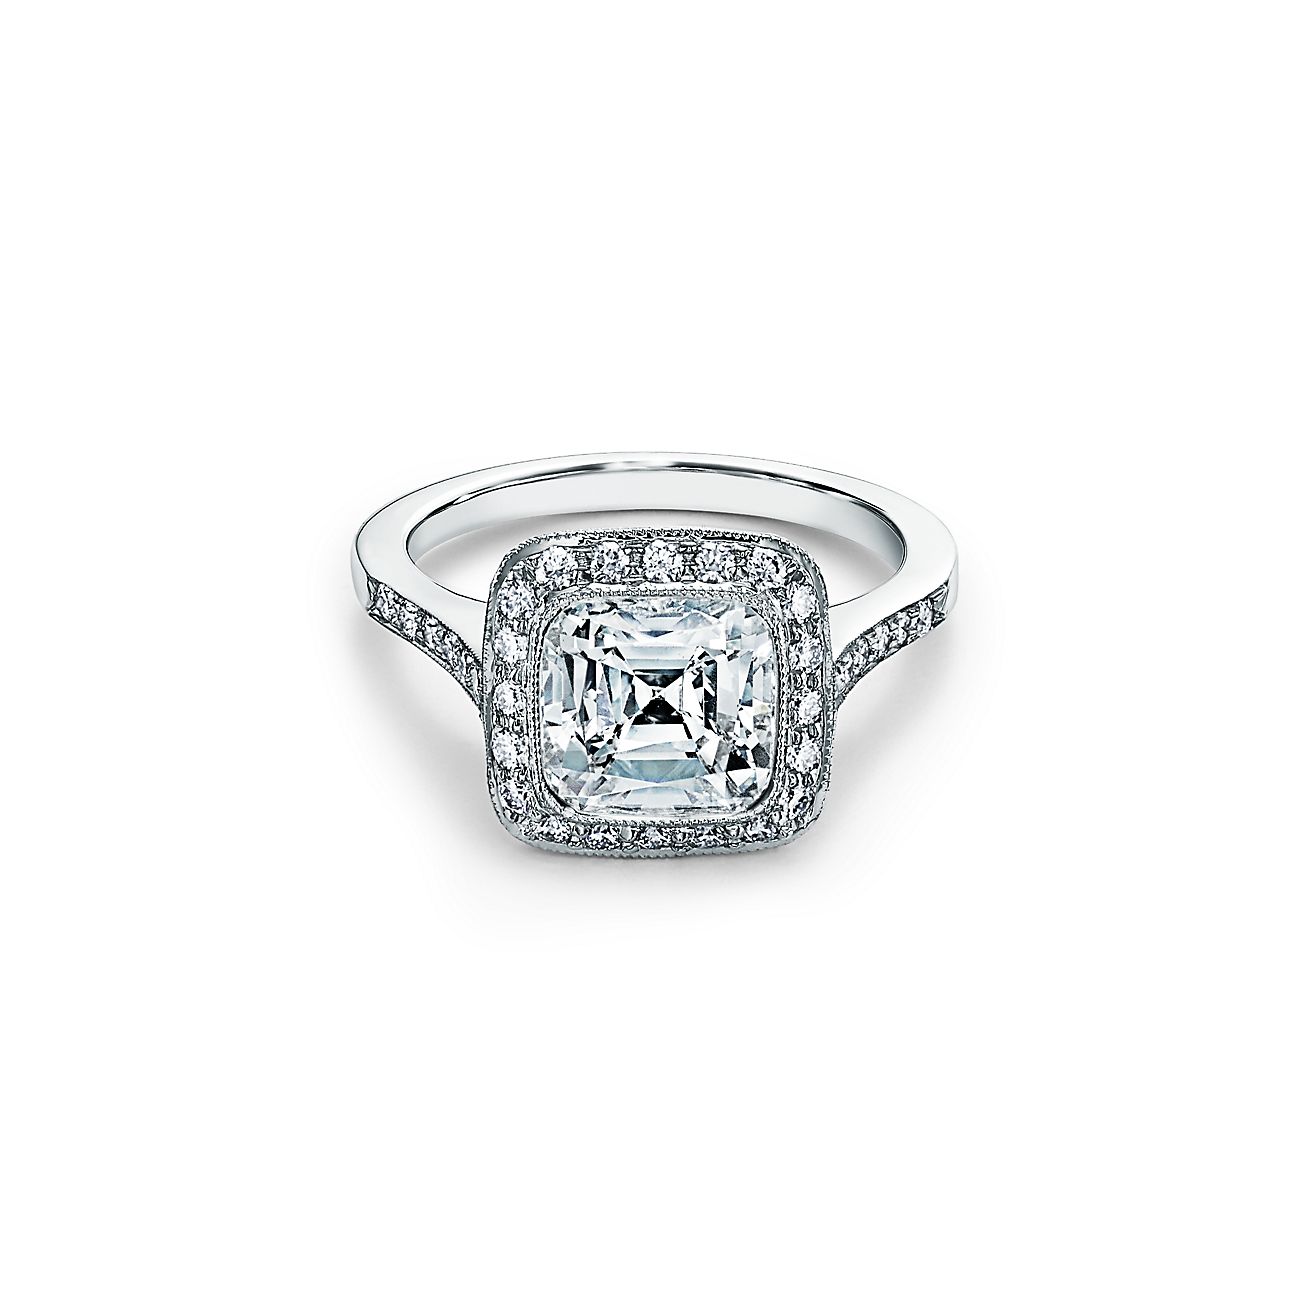 Tiffany Legacy™ engagement ring with a 